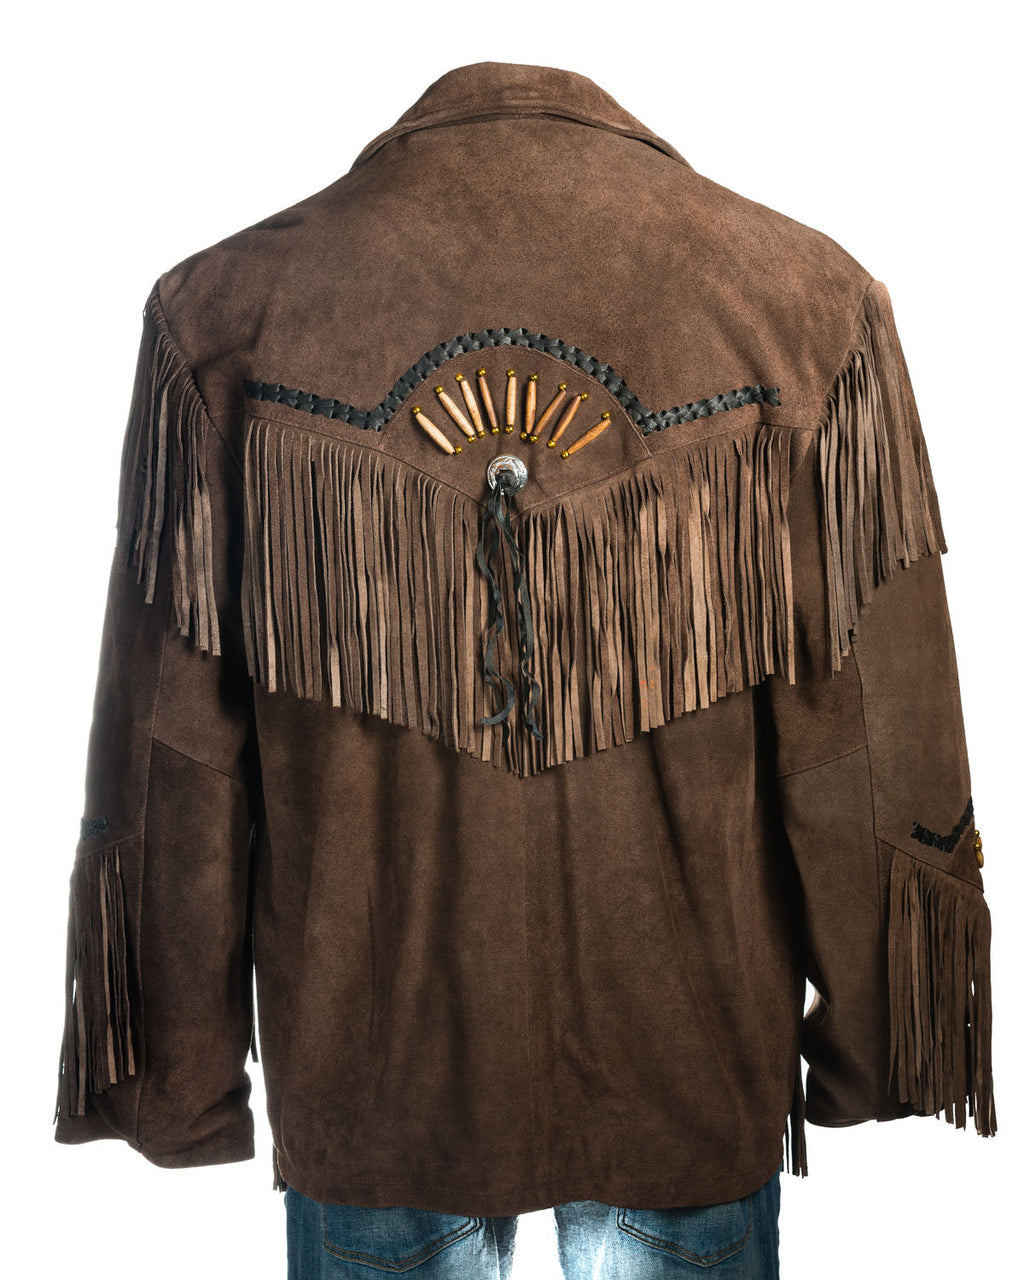 Men's Brown Suede Native American Western Style Jacket with Fringe and Beads - Navajo Men's